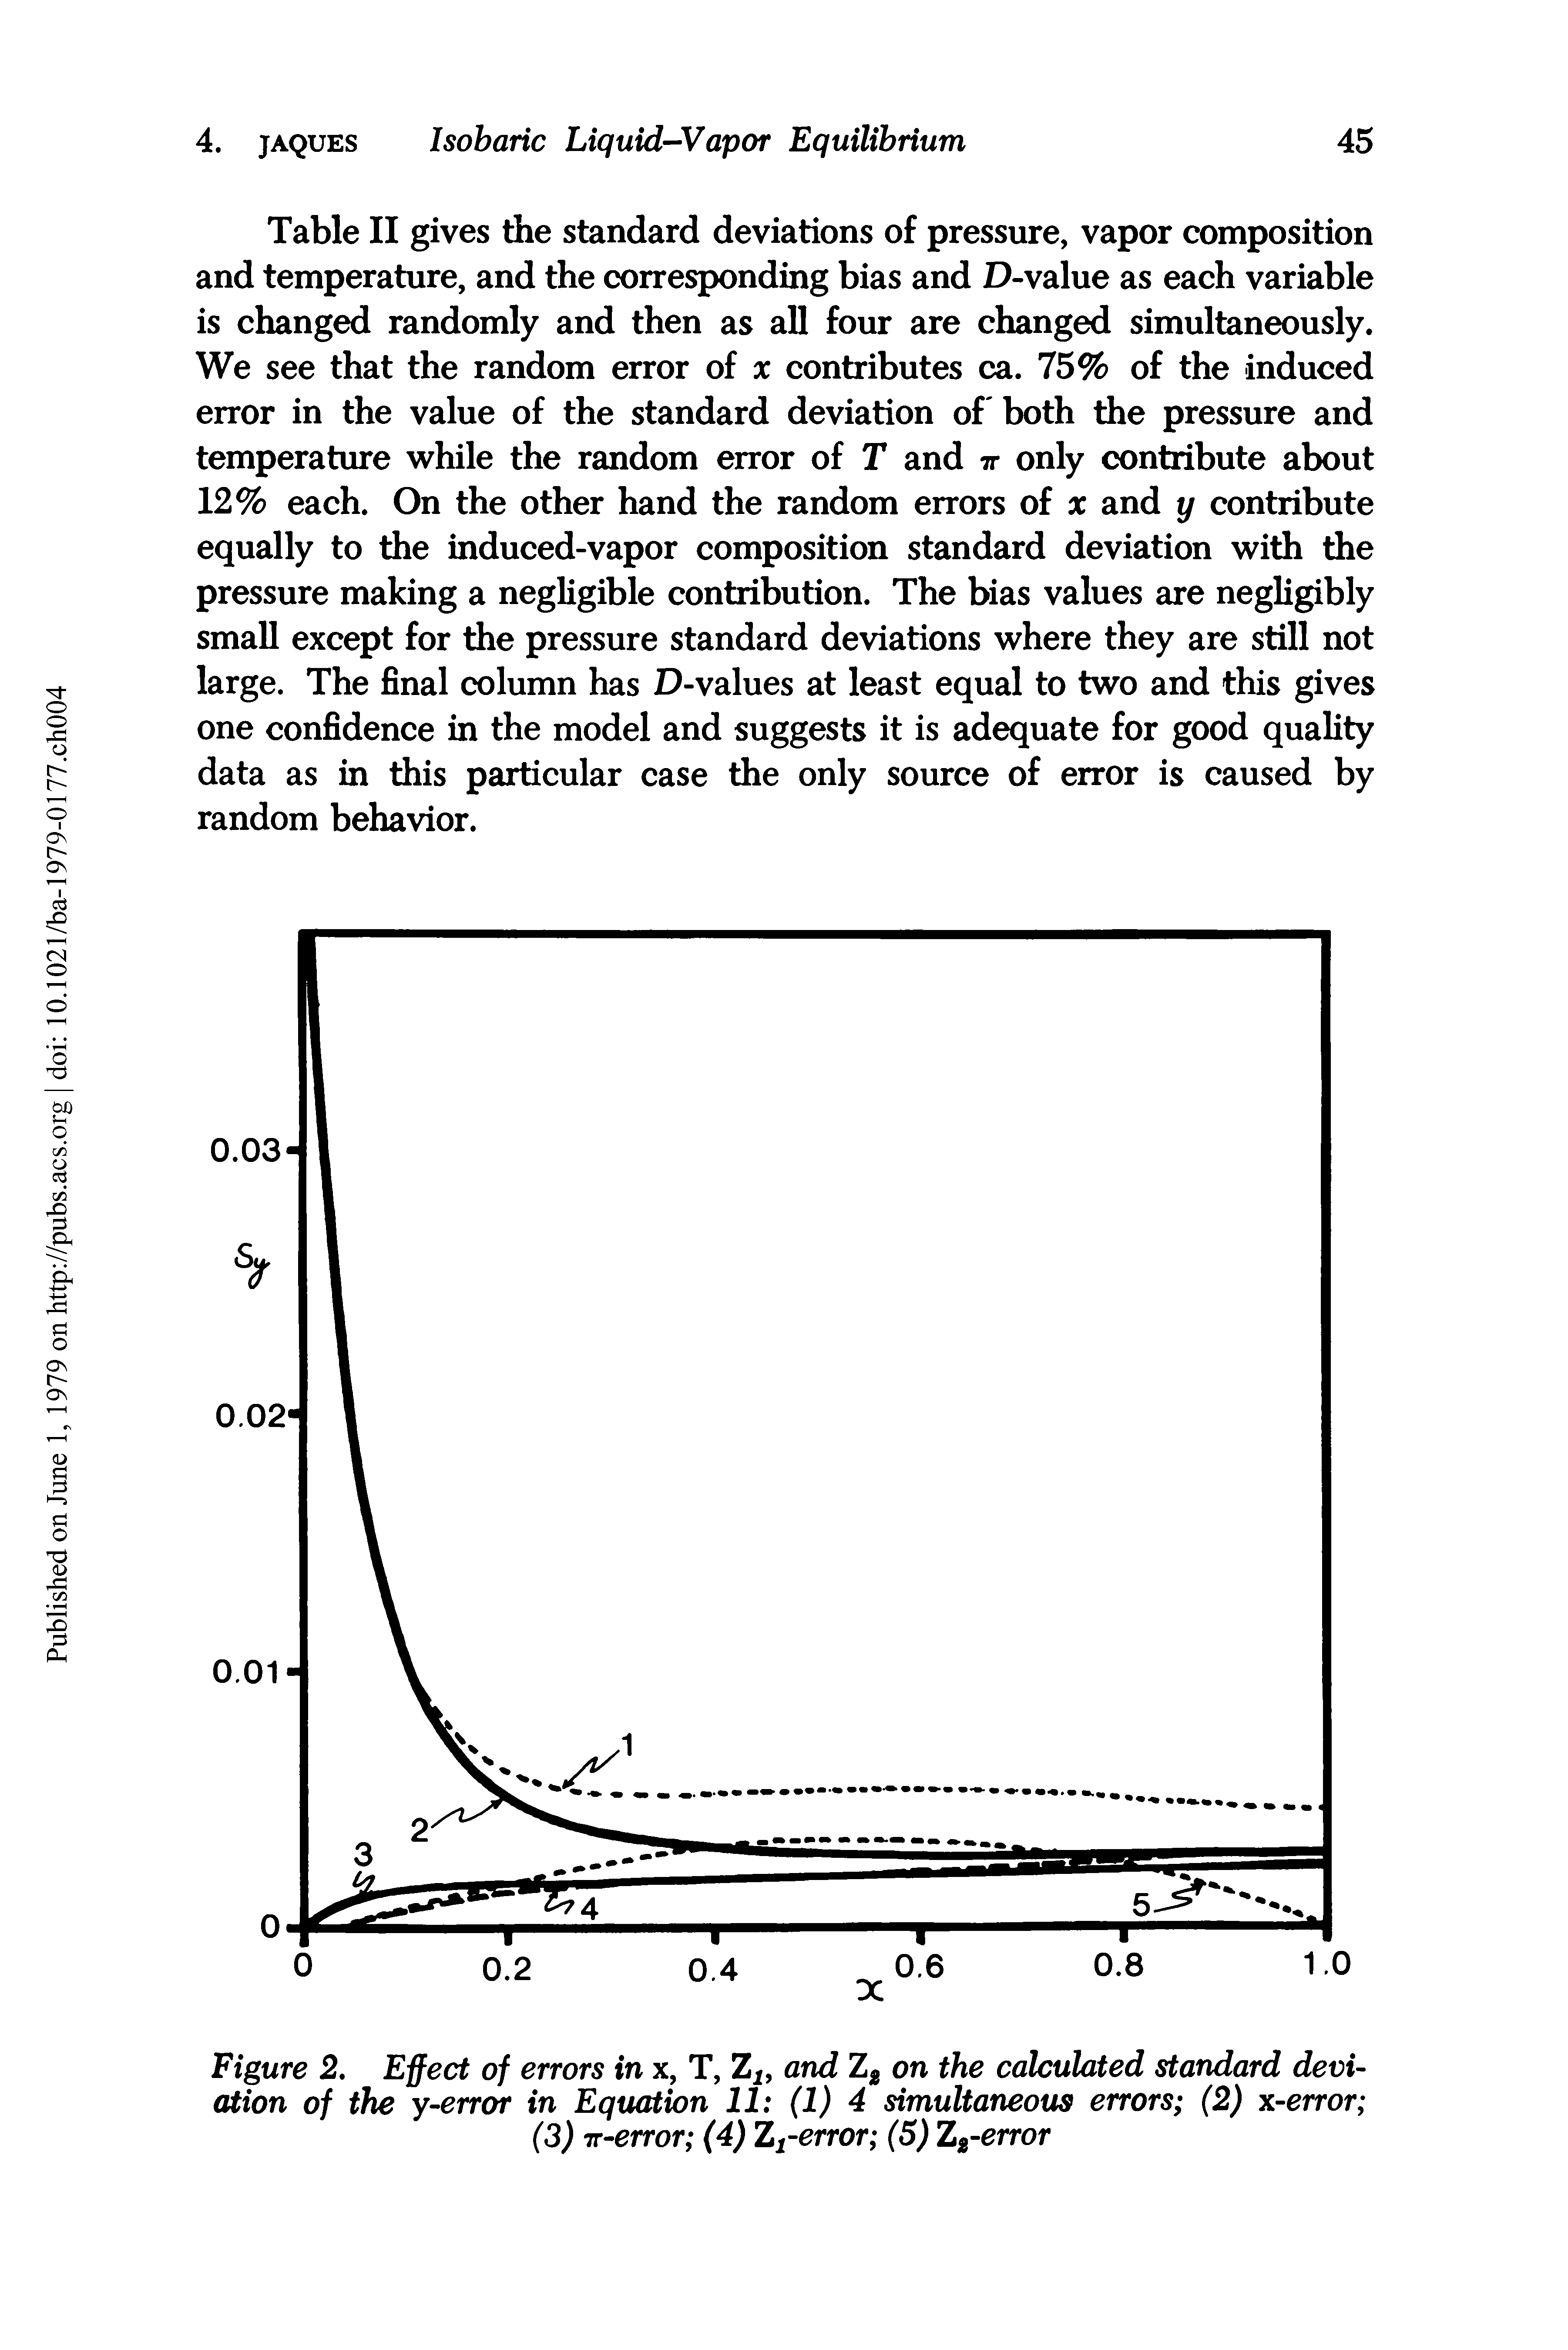 Figure 2. Effect of errors in x, T, Zi5 and Z2 on the calculated standard deviation of the y-error in Equation 11 (1) 4 simultaneous errors (2) x-error (3) 7T-error (4) Zrerror (5) Zg-error...